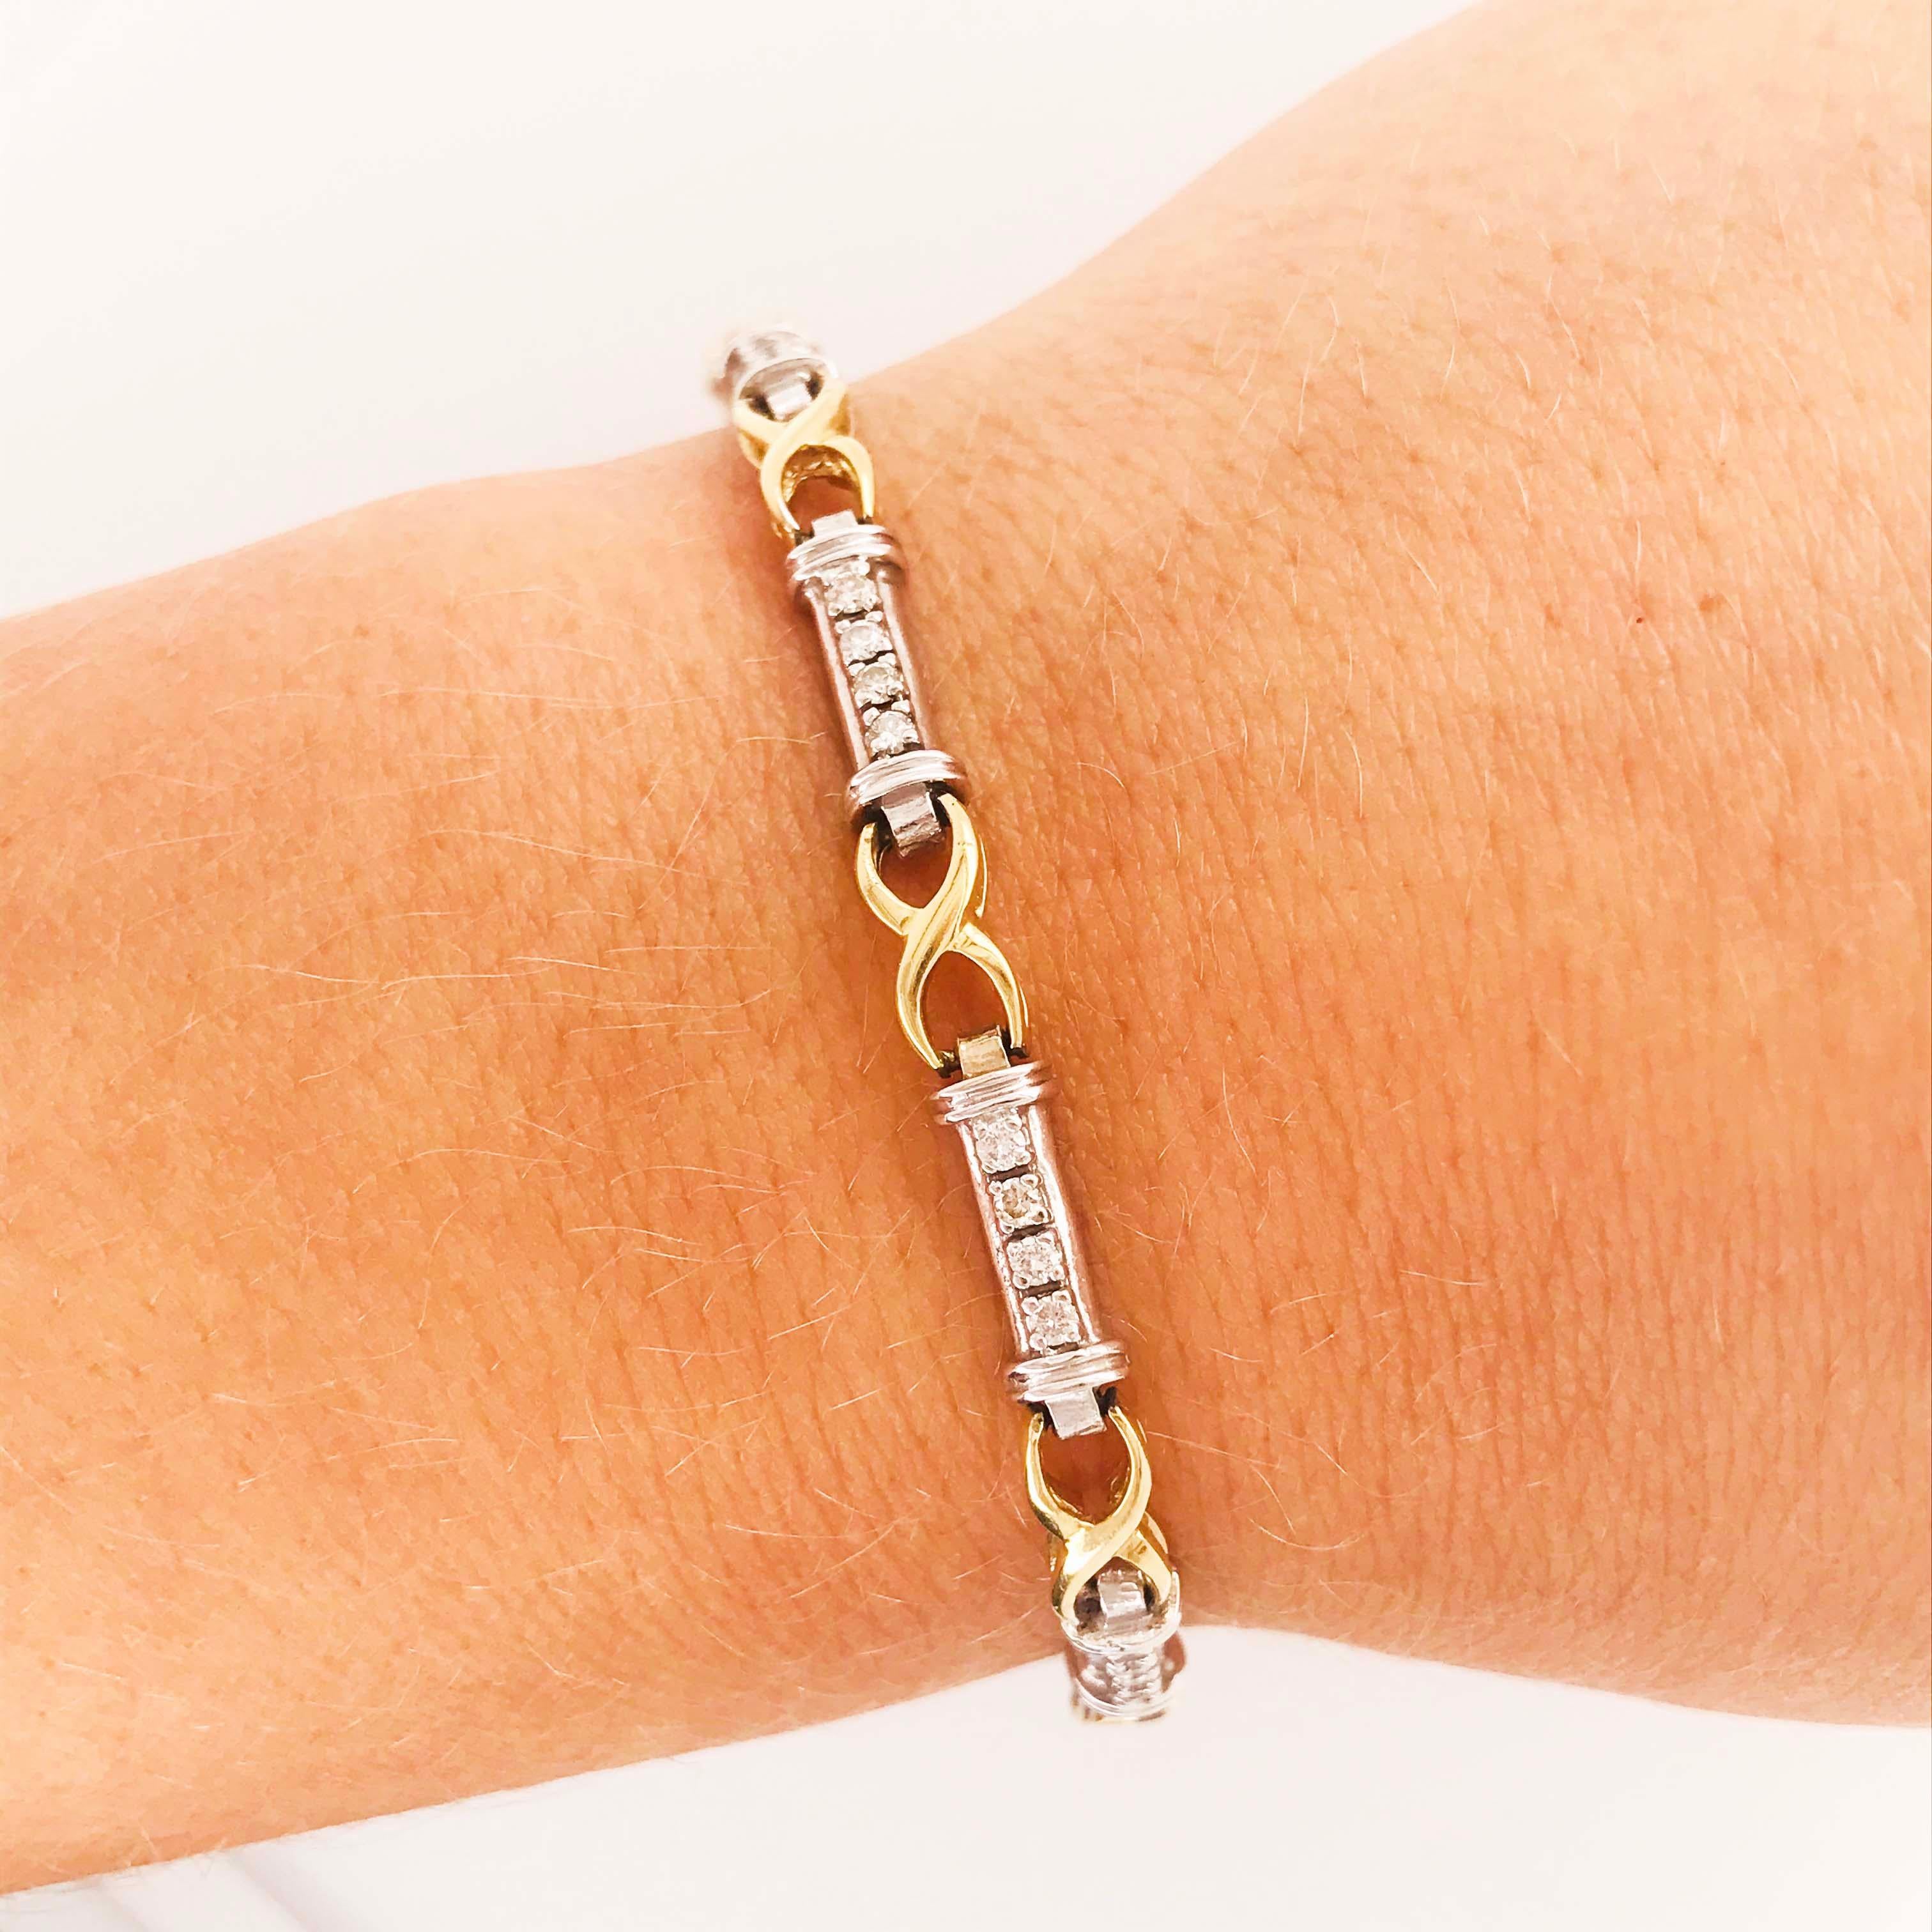 This two-tone diamond bracelet is the perfect addition to any stacking bracelets.  The 14 karat white gold and yellow gold is beautifully paired with your yellow gold bracelets or your platinum, white gold or sterling bracelets.  The bracelet was